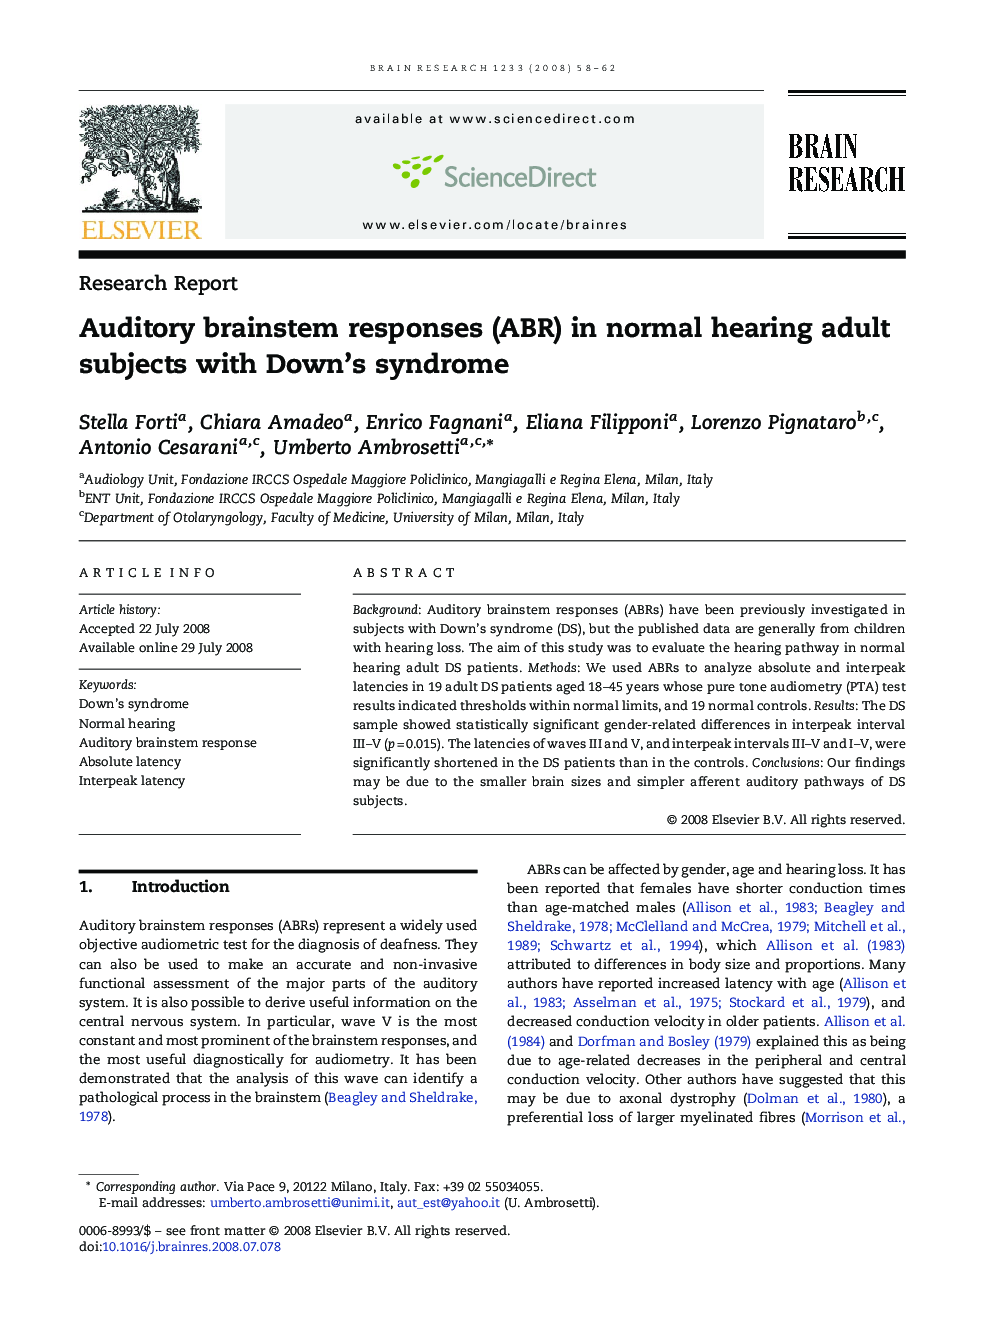 Auditory brainstem responses (ABR) in normal hearing adult subjects with Down's syndrome